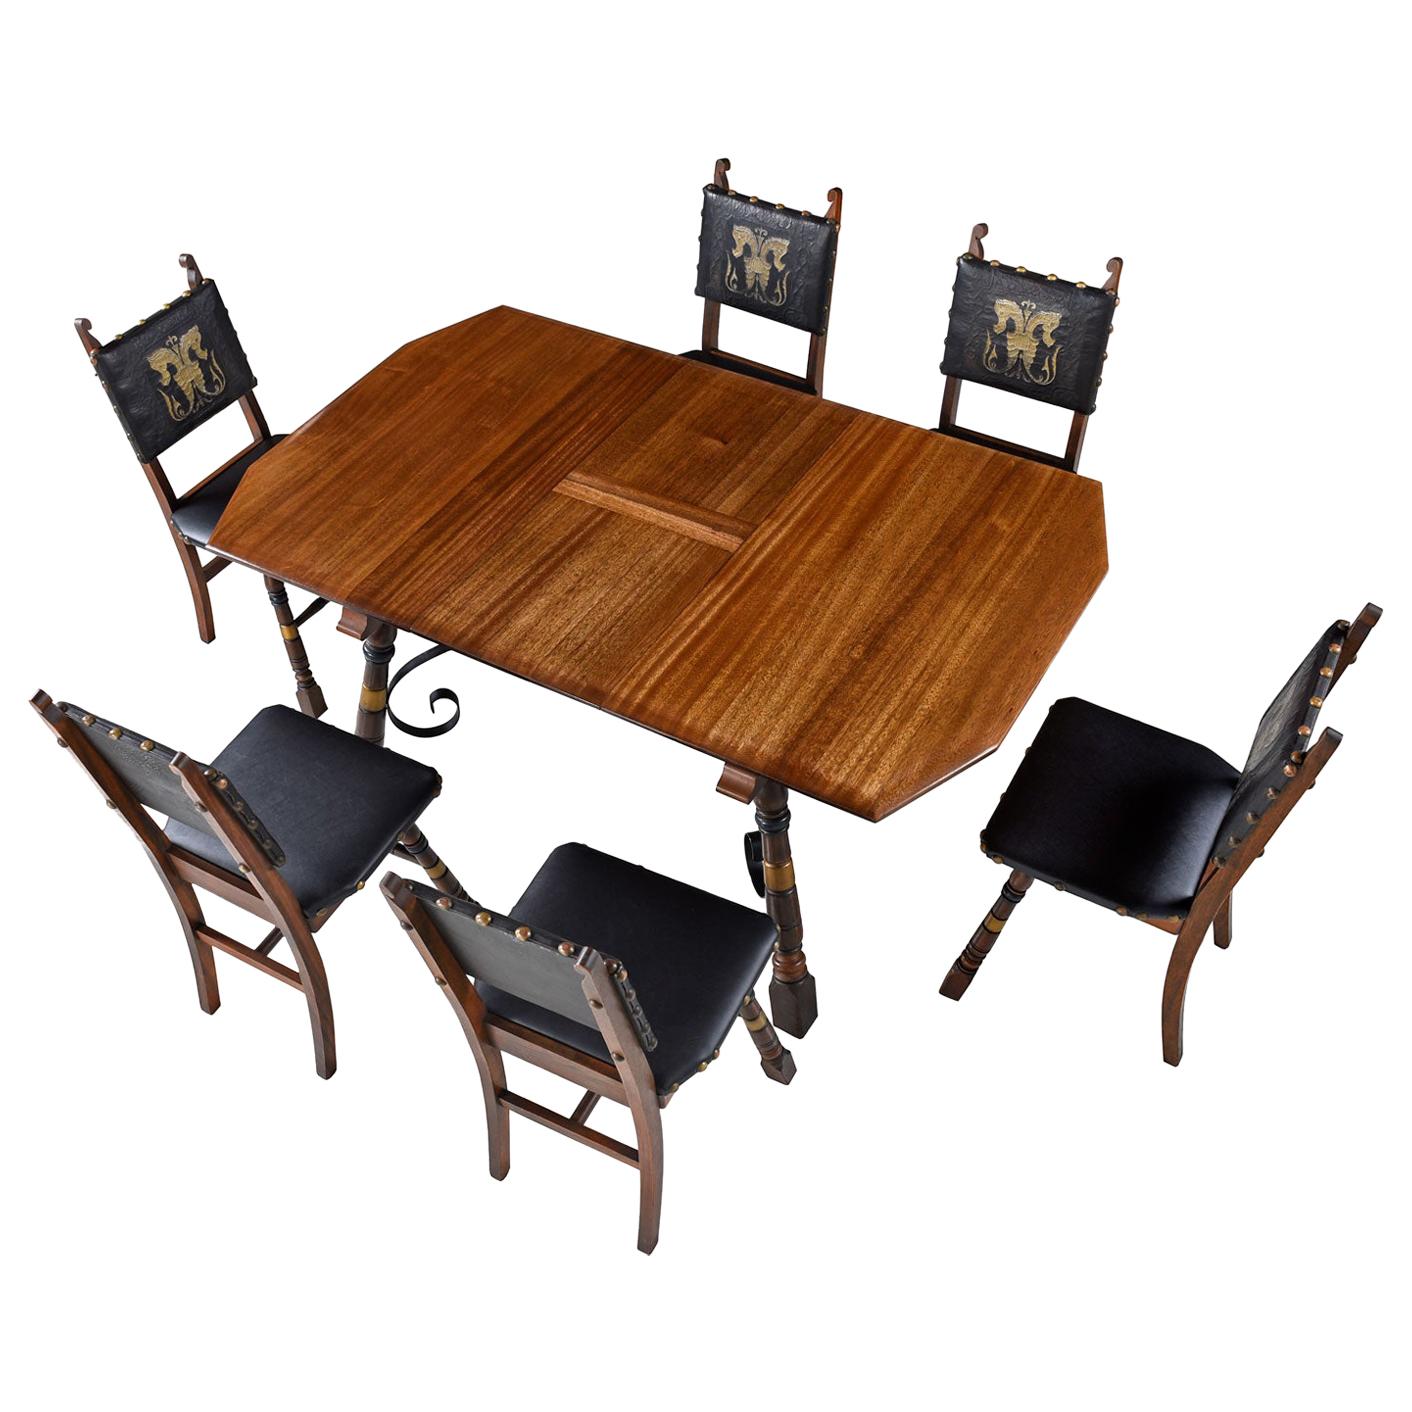 Gothic Revival Style Dragon Motif Brass and Leather Mahogany Oak Table & Chairs